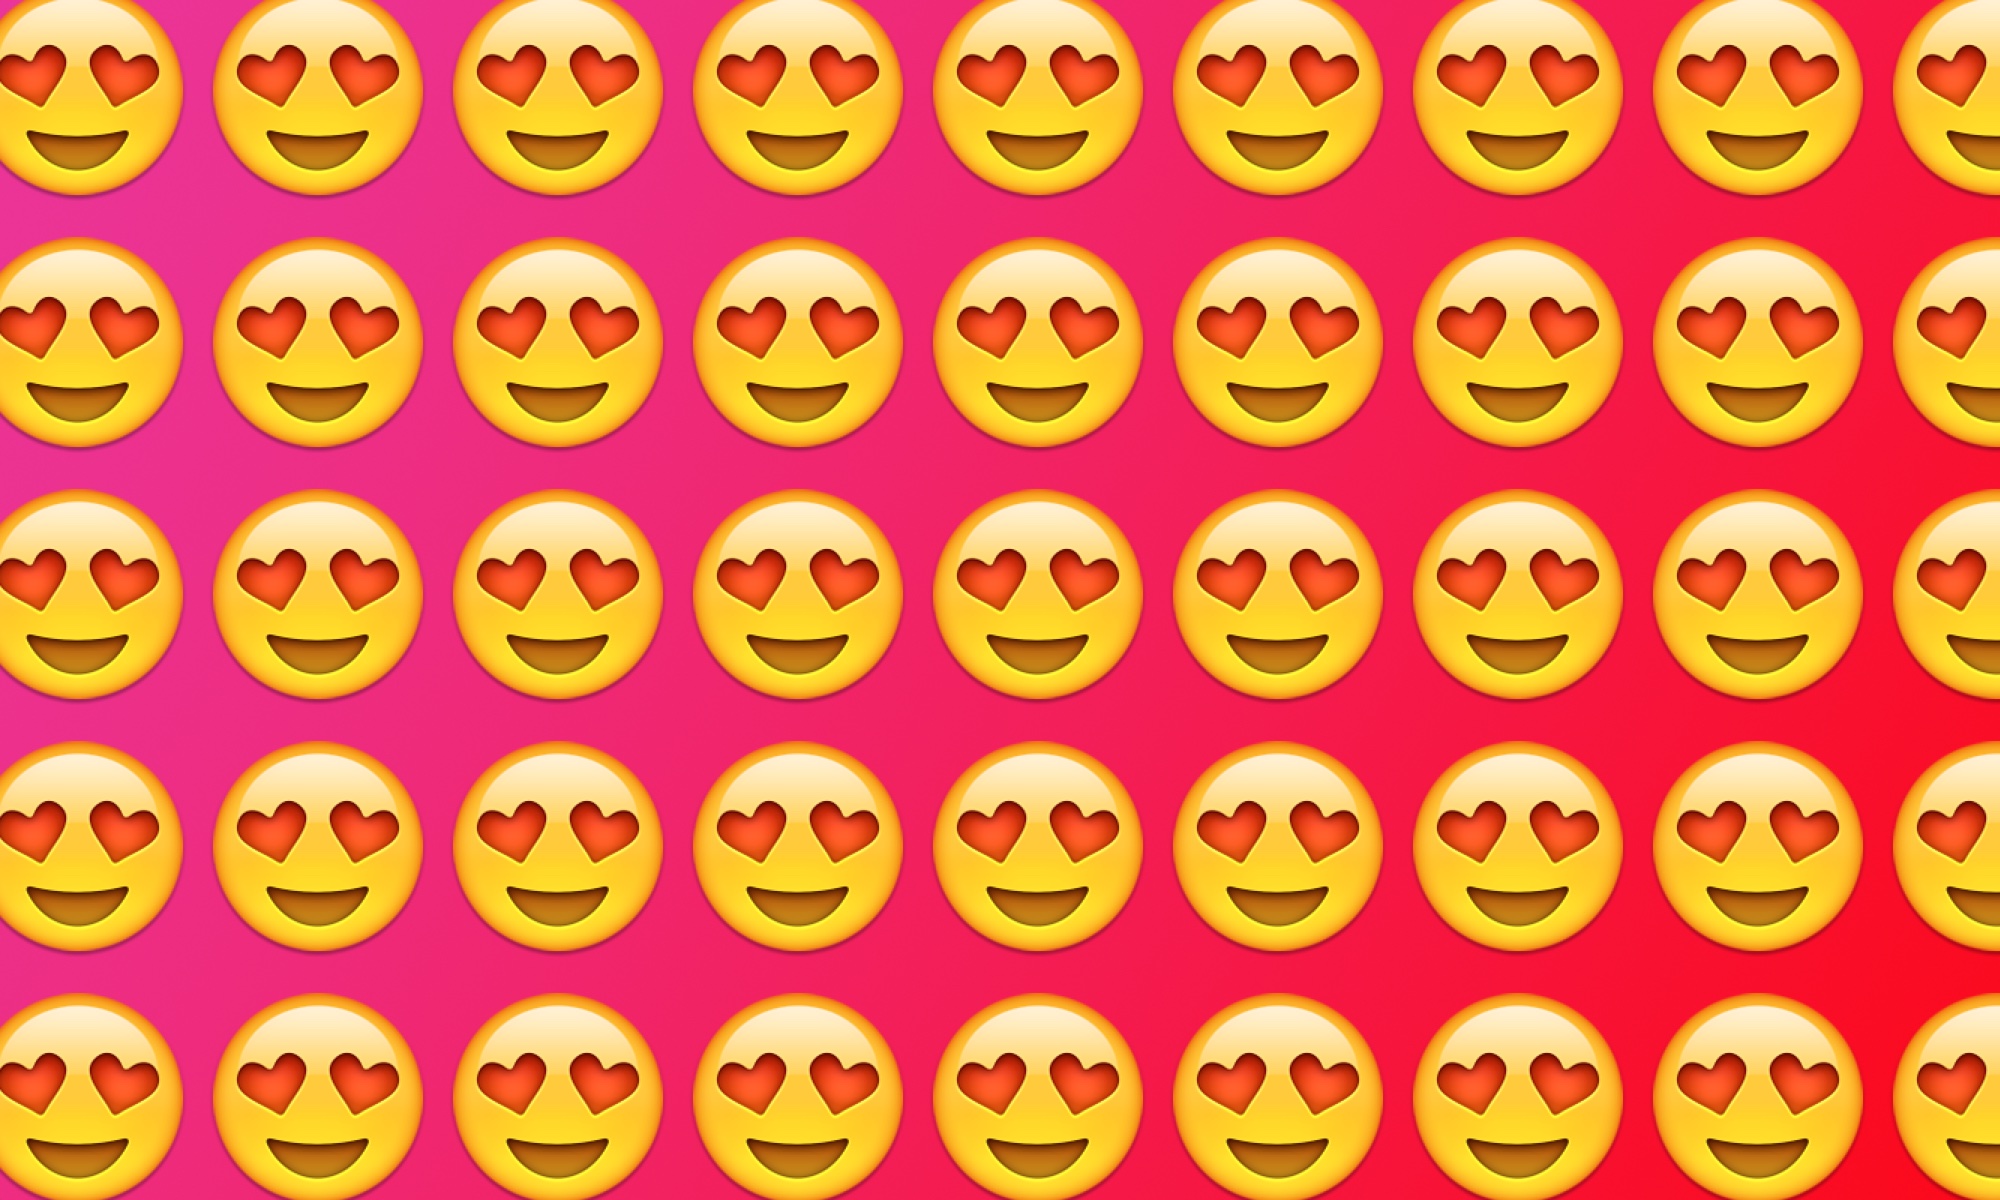 Emojiology Smiling Face With Heart Eyes